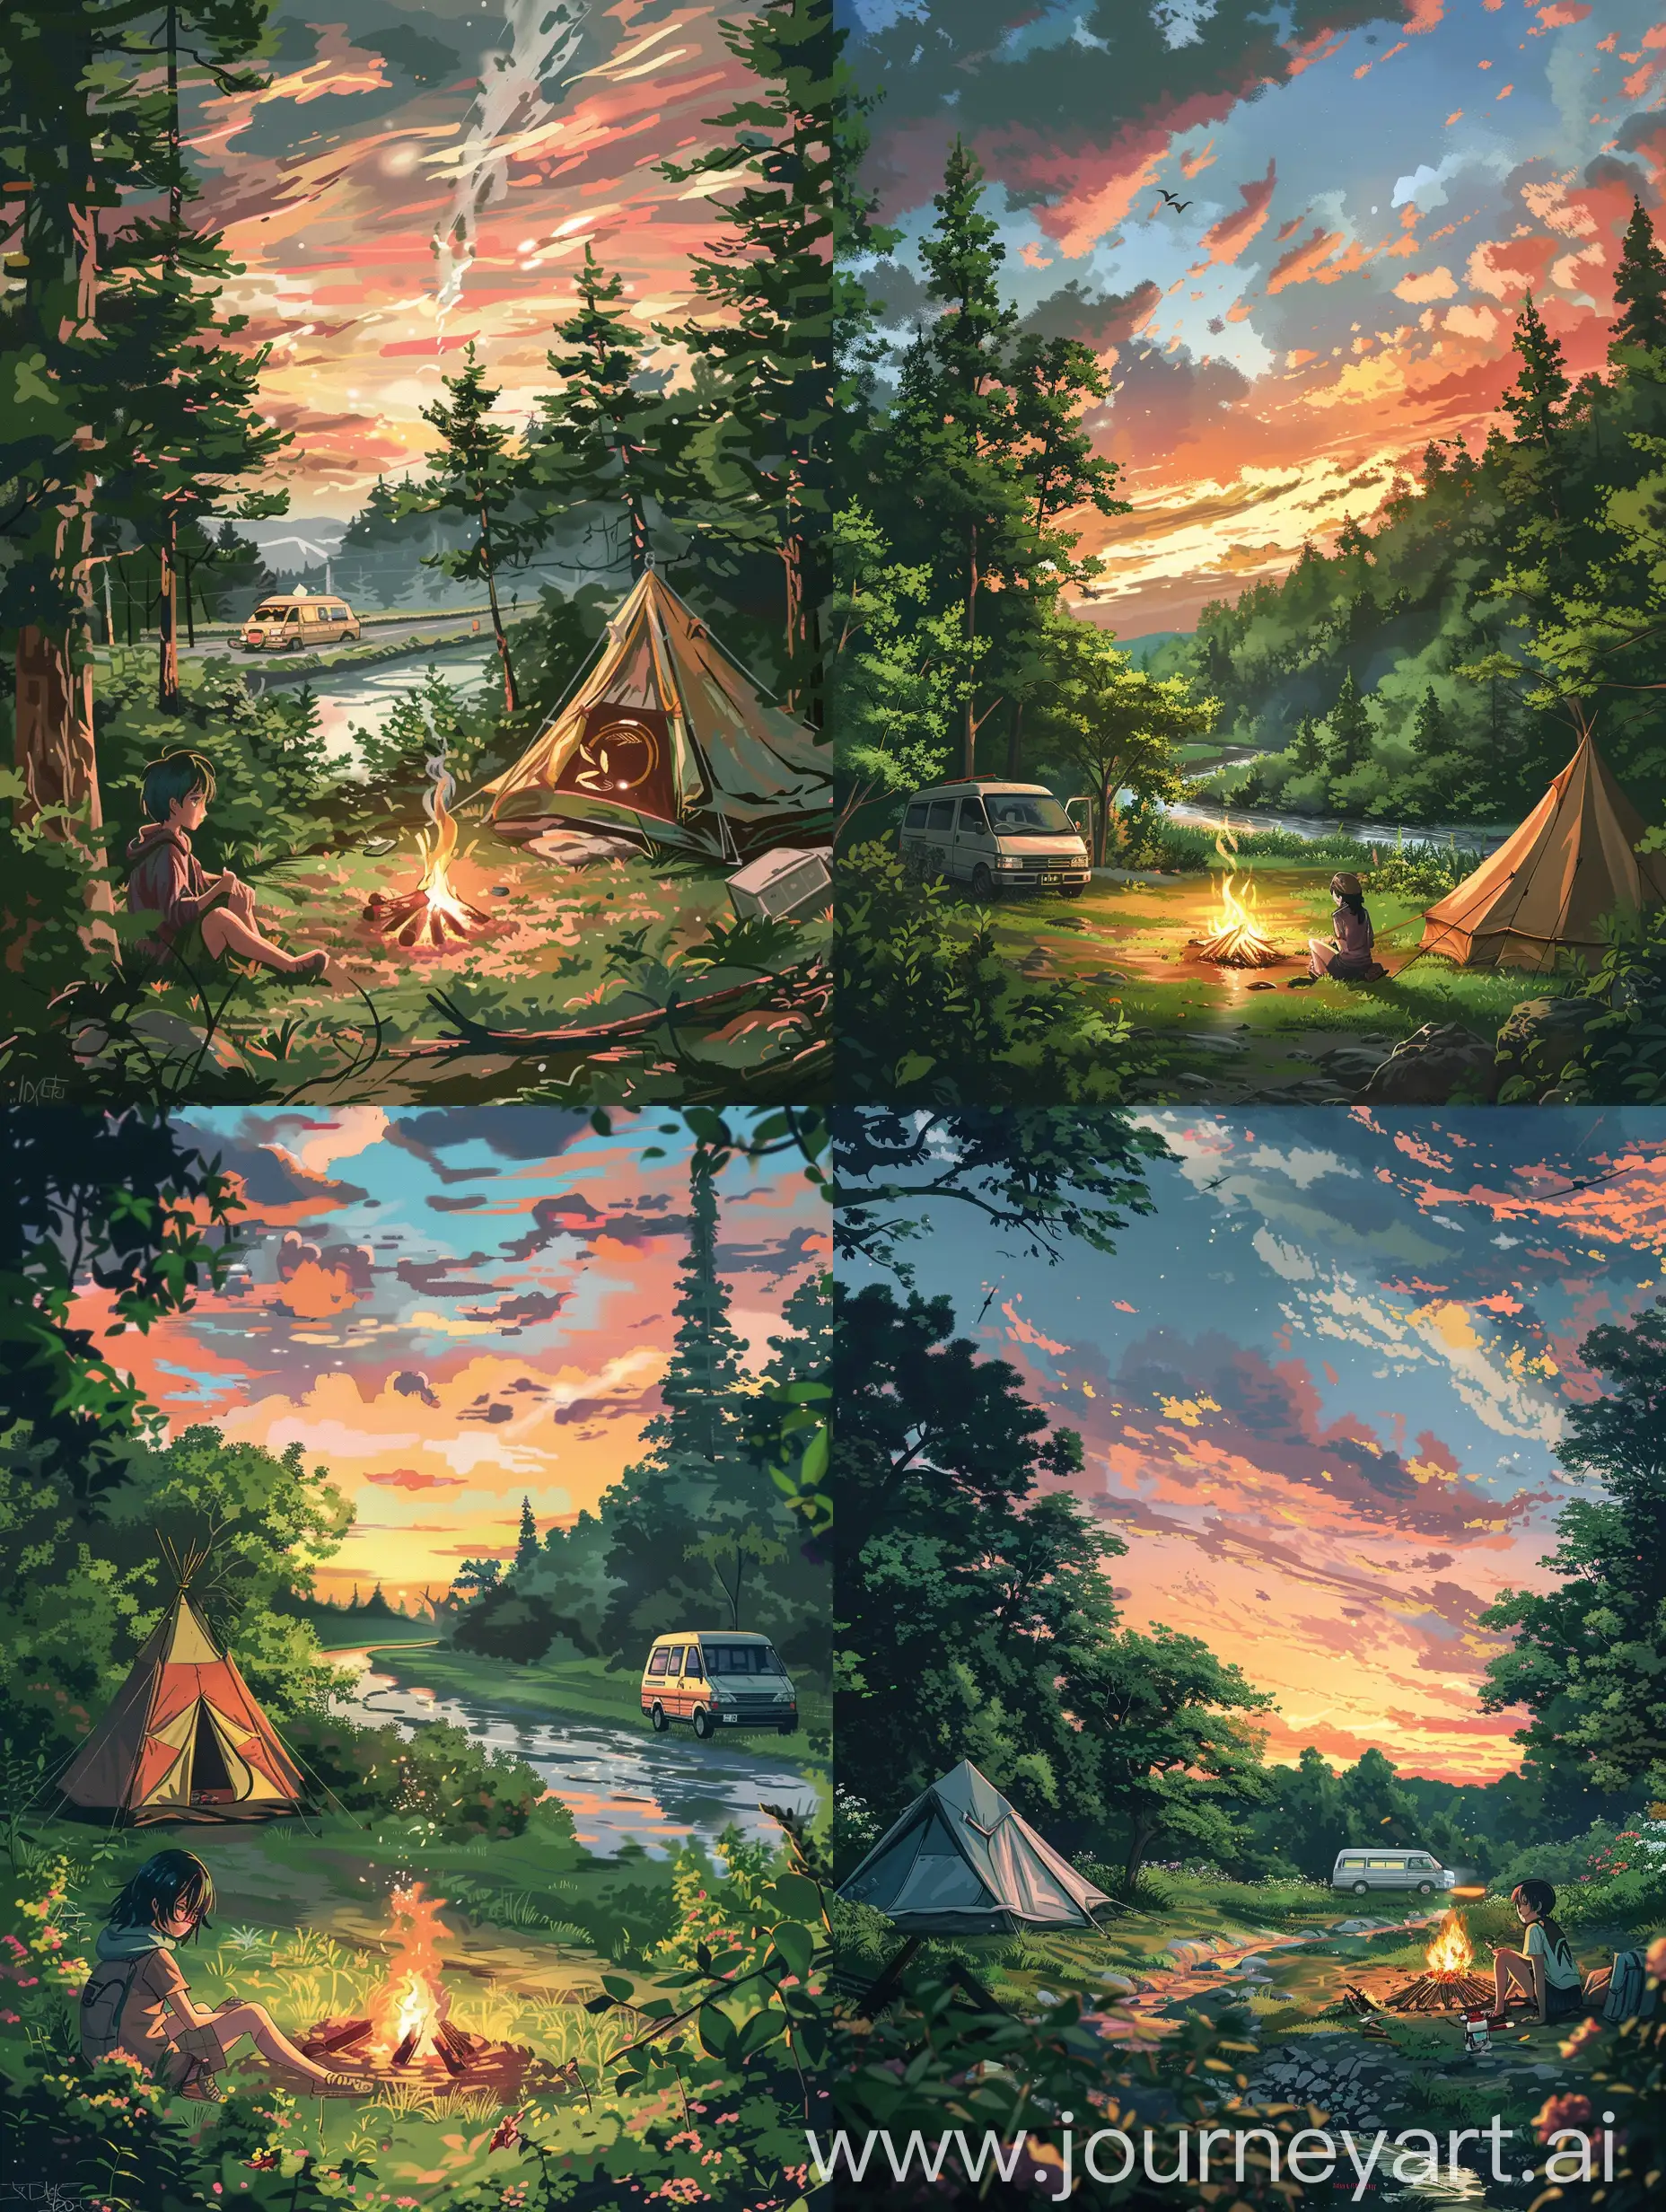 Tranquil-Anime-Style-Scene-Serene-Summer-Evening-by-the-Campfire